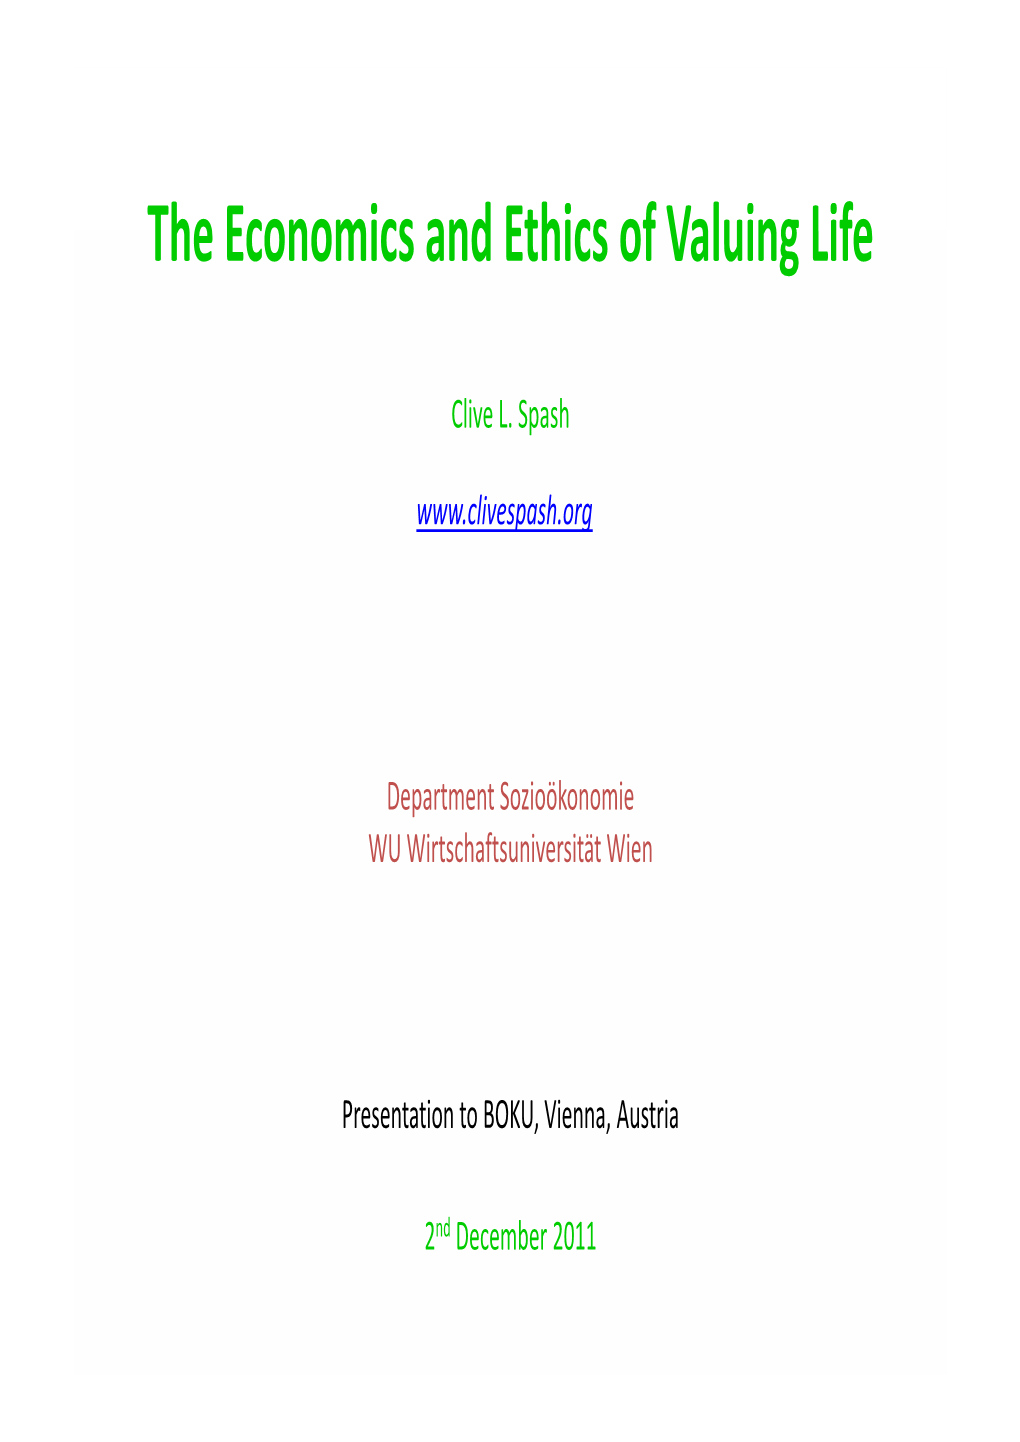 The Economics and Ethics of Valuing Life